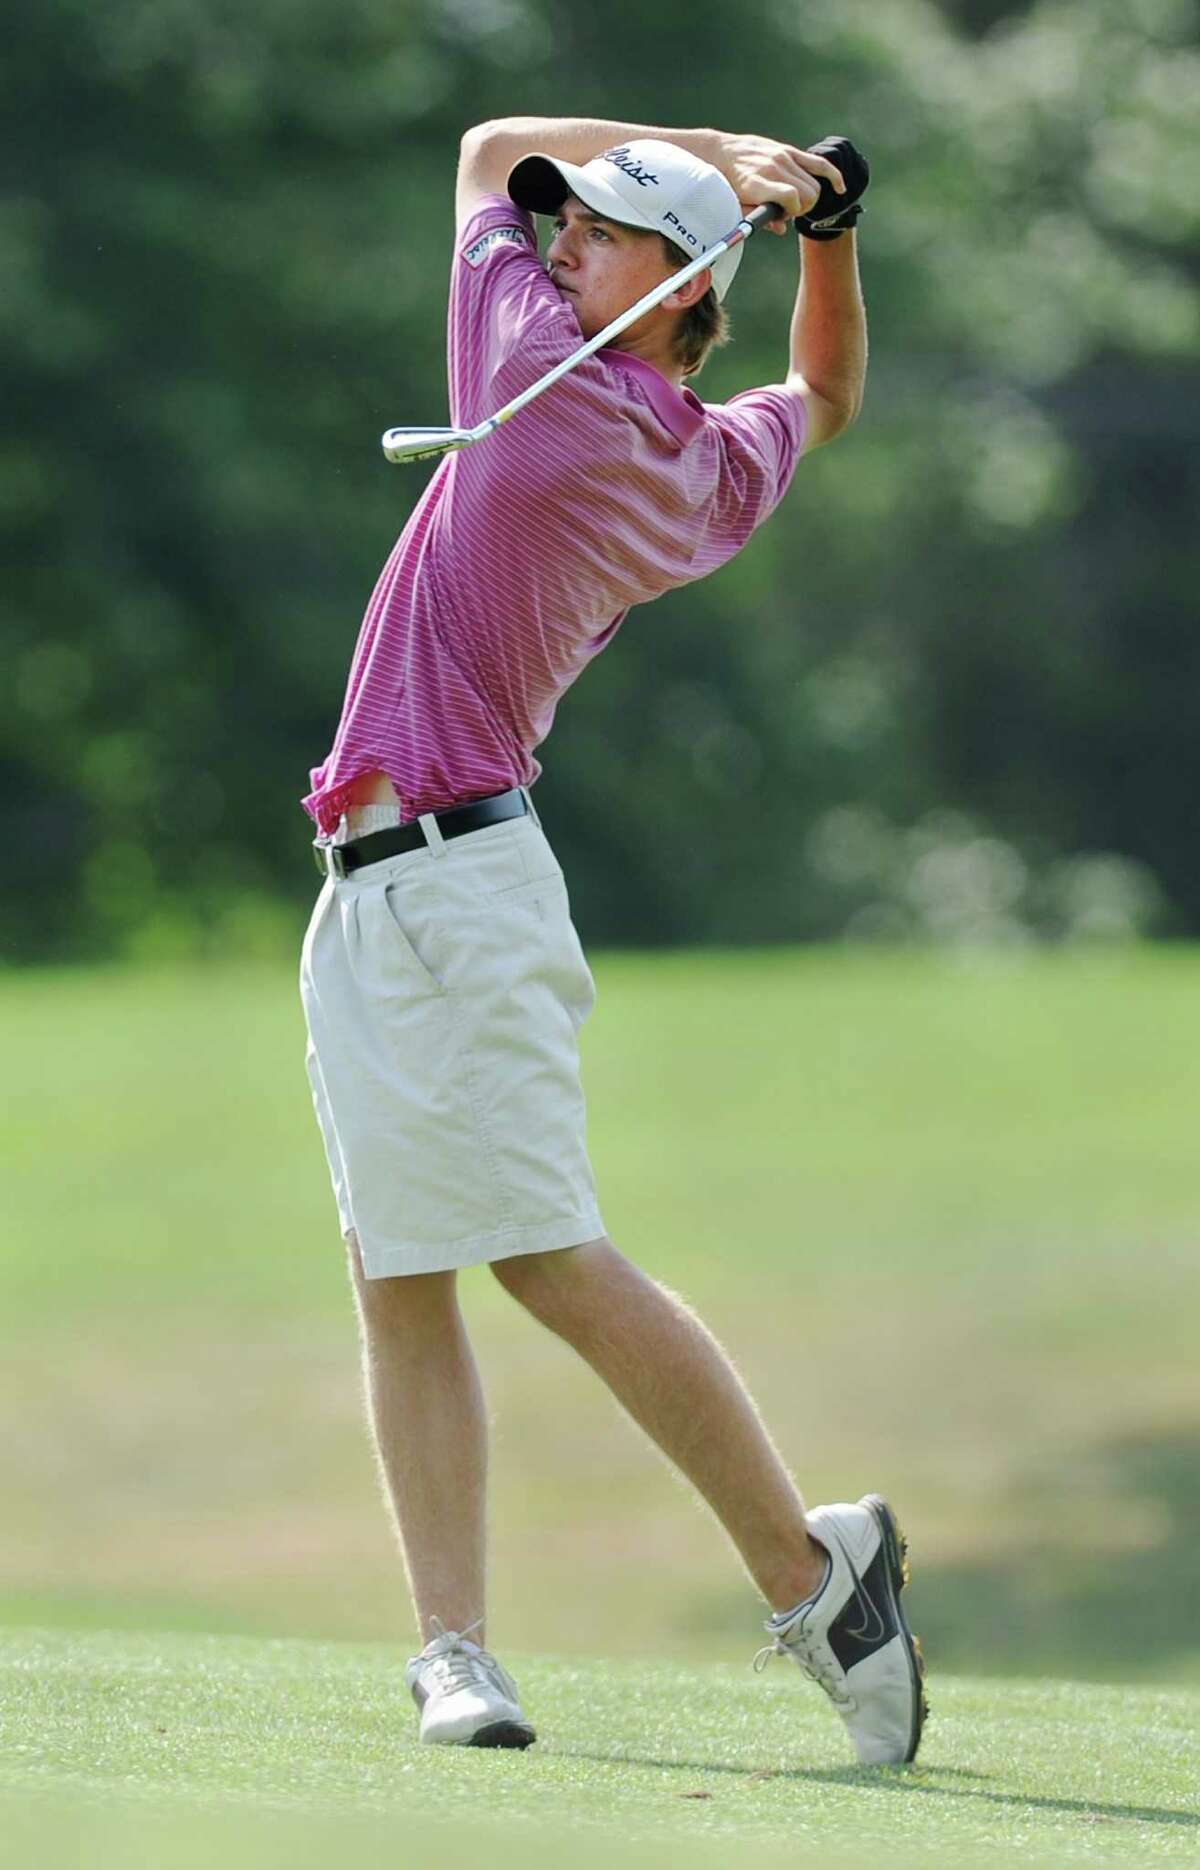 Patrick Hallisey tees off during day two of the Danbury Amateur Golf Championship at Richter Park Golf Club in Danbury, Conn. on Saturday, July 21, 2013.